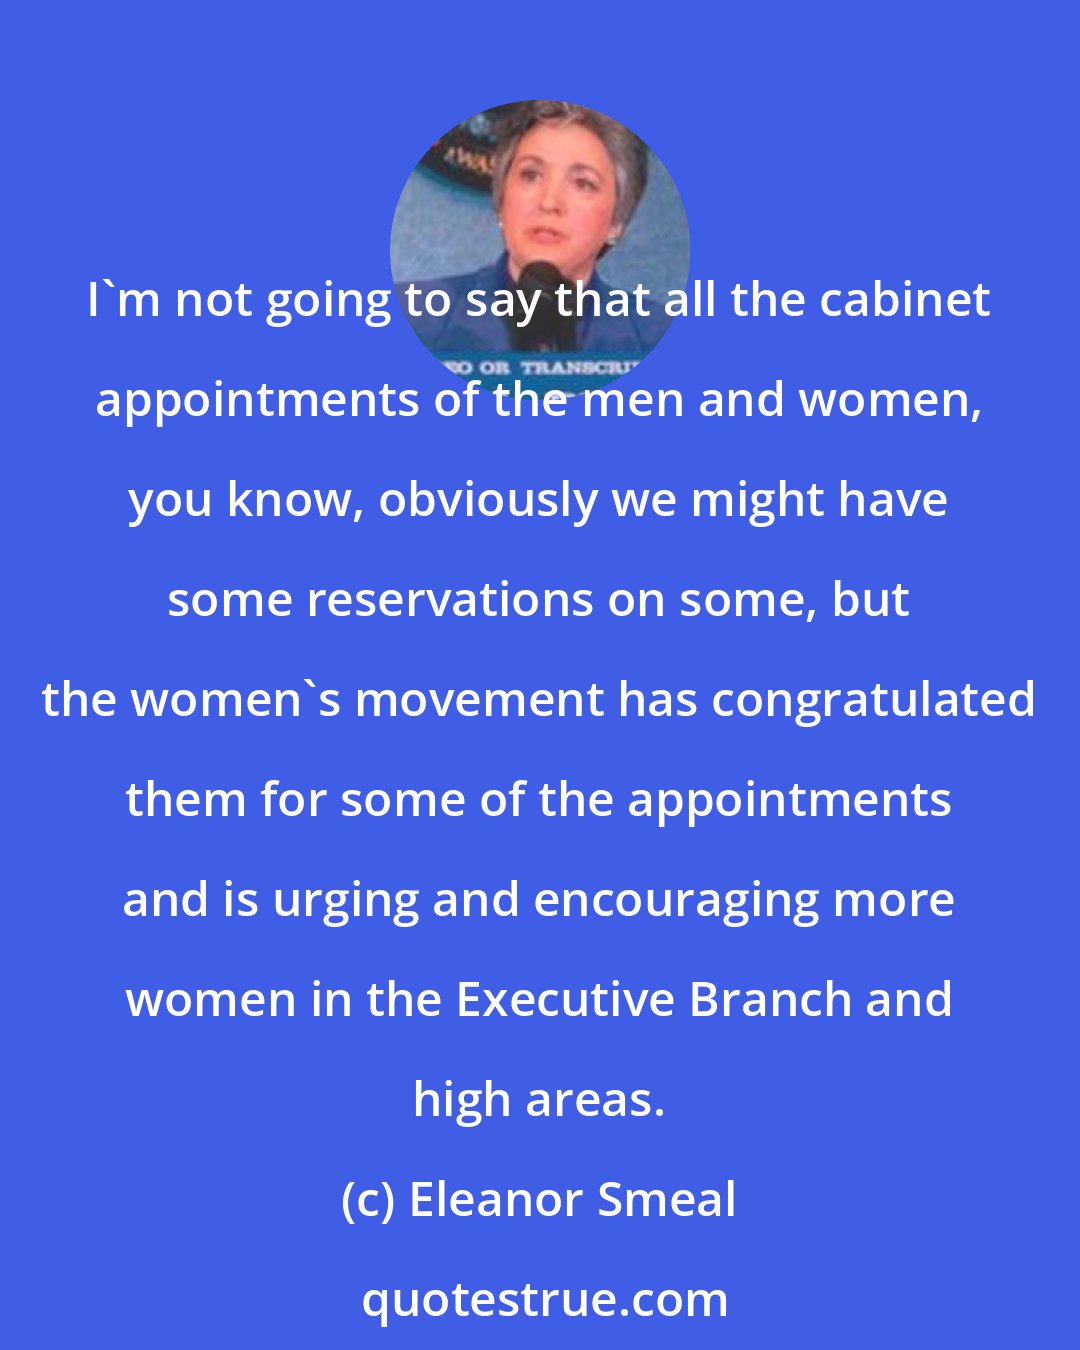 Eleanor Smeal: I'm not going to say that all the cabinet appointments of the men and women, you know, obviously we might have some reservations on some, but the women's movement has congratulated them for some of the appointments and is urging and encouraging more women in the Executive Branch and high areas.